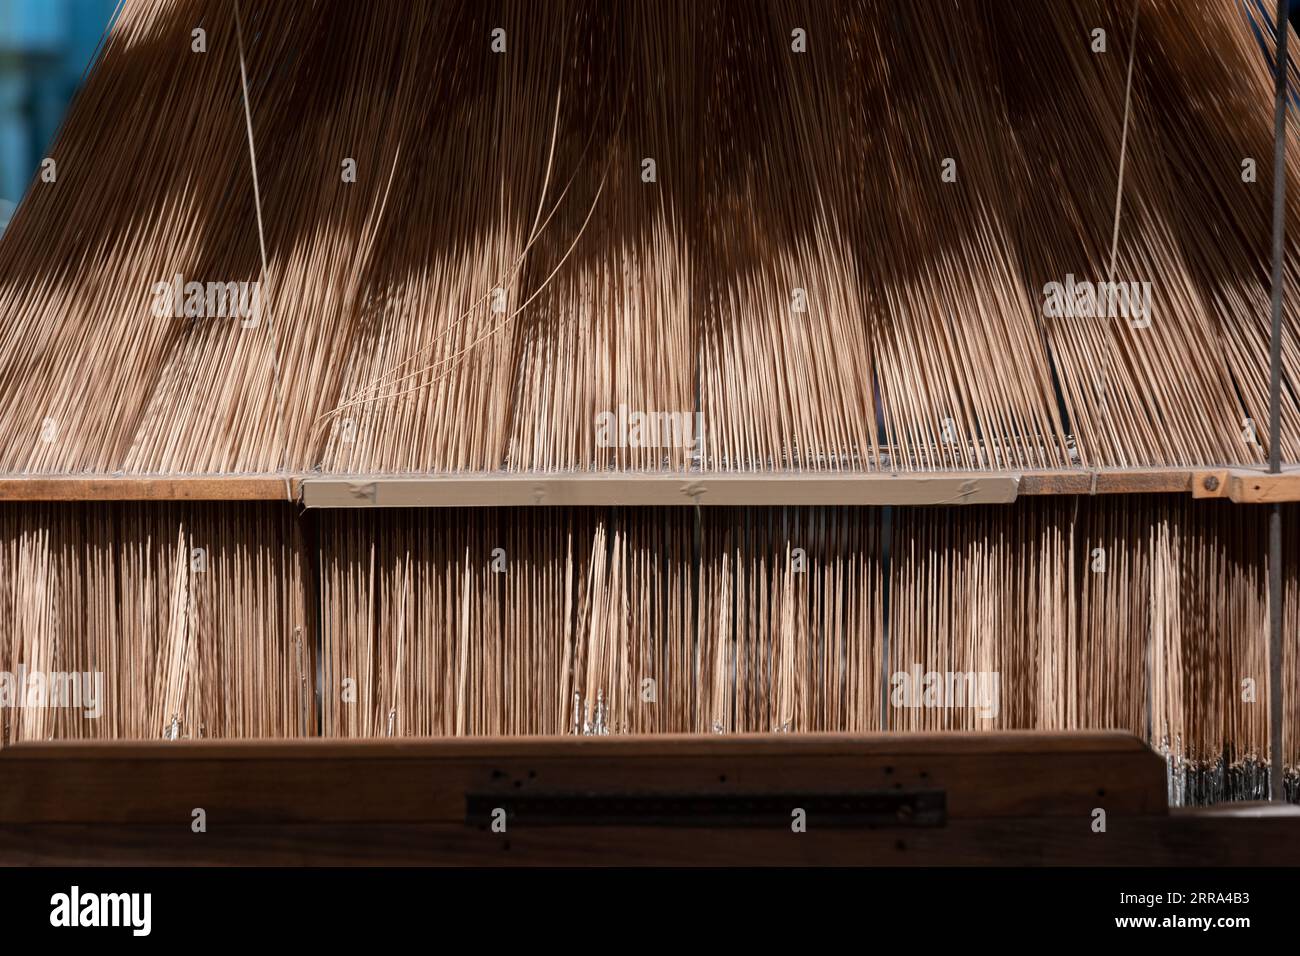 Threads of silk weaving loom with a Jacquard attachment from 19th century in National Museum of Scotland in Edinburgh, Scotland, UK. Stock Photo